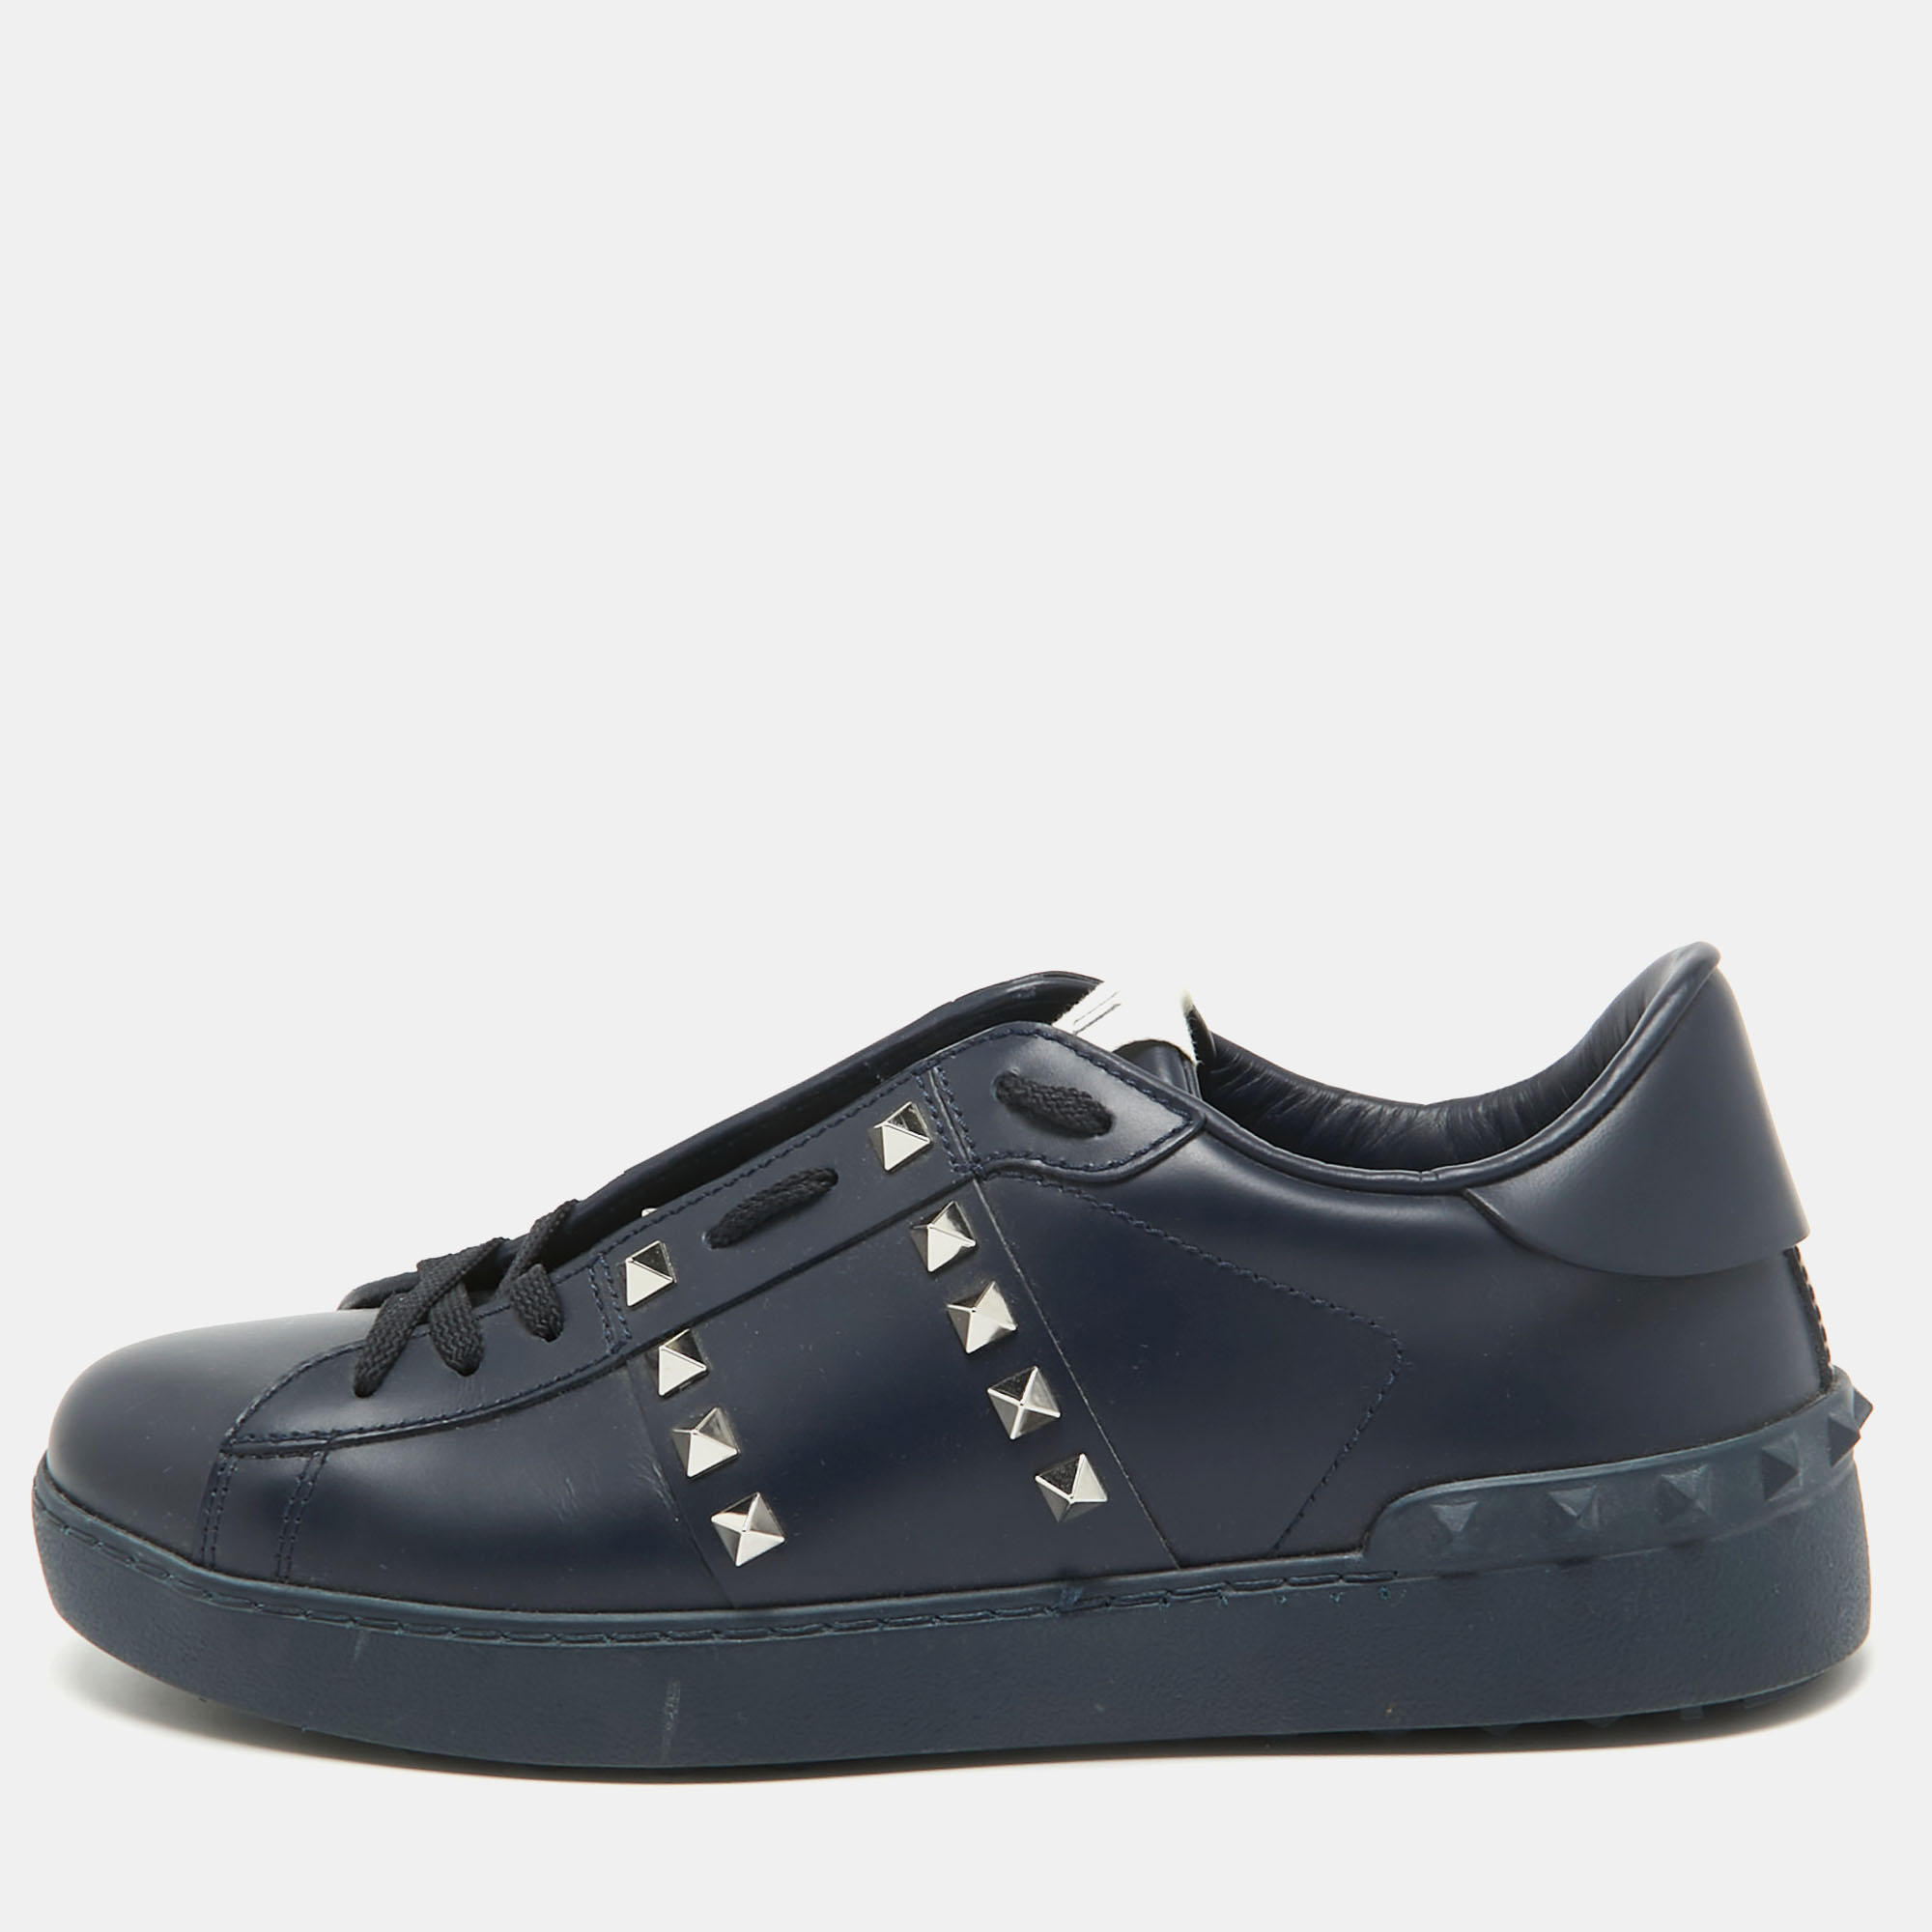 Pre-owned Valentino Garavani Navy Blue Leather Rockstud Low Top Sneakers Size 39